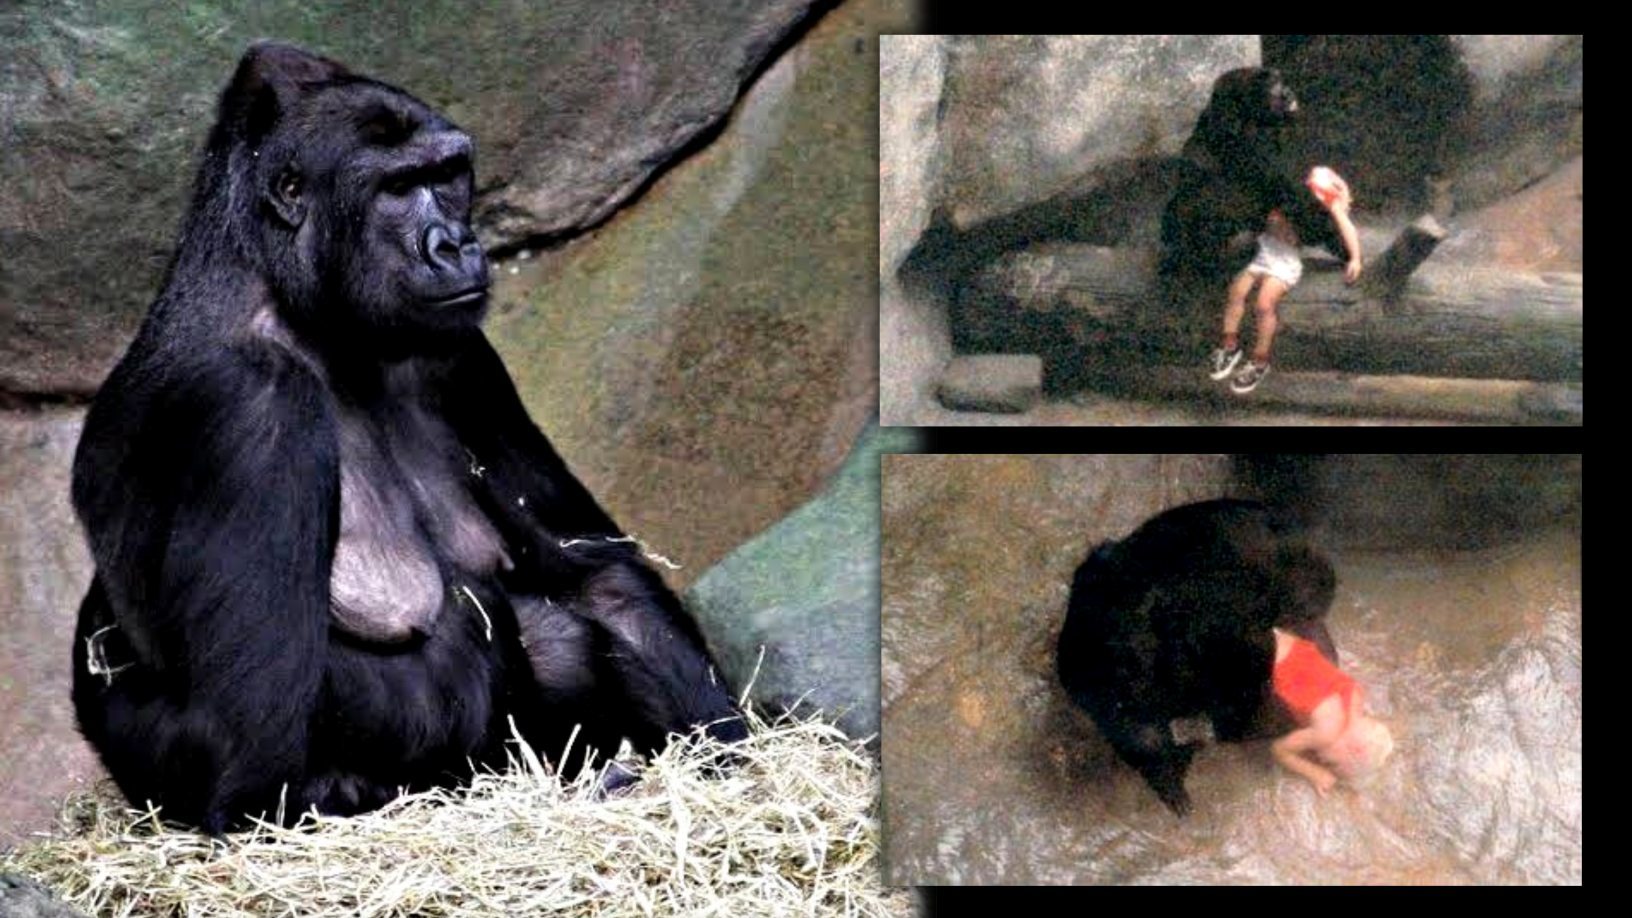 Binti Jua: This female gorilla saved a child who fell into her zoo enclosure 2